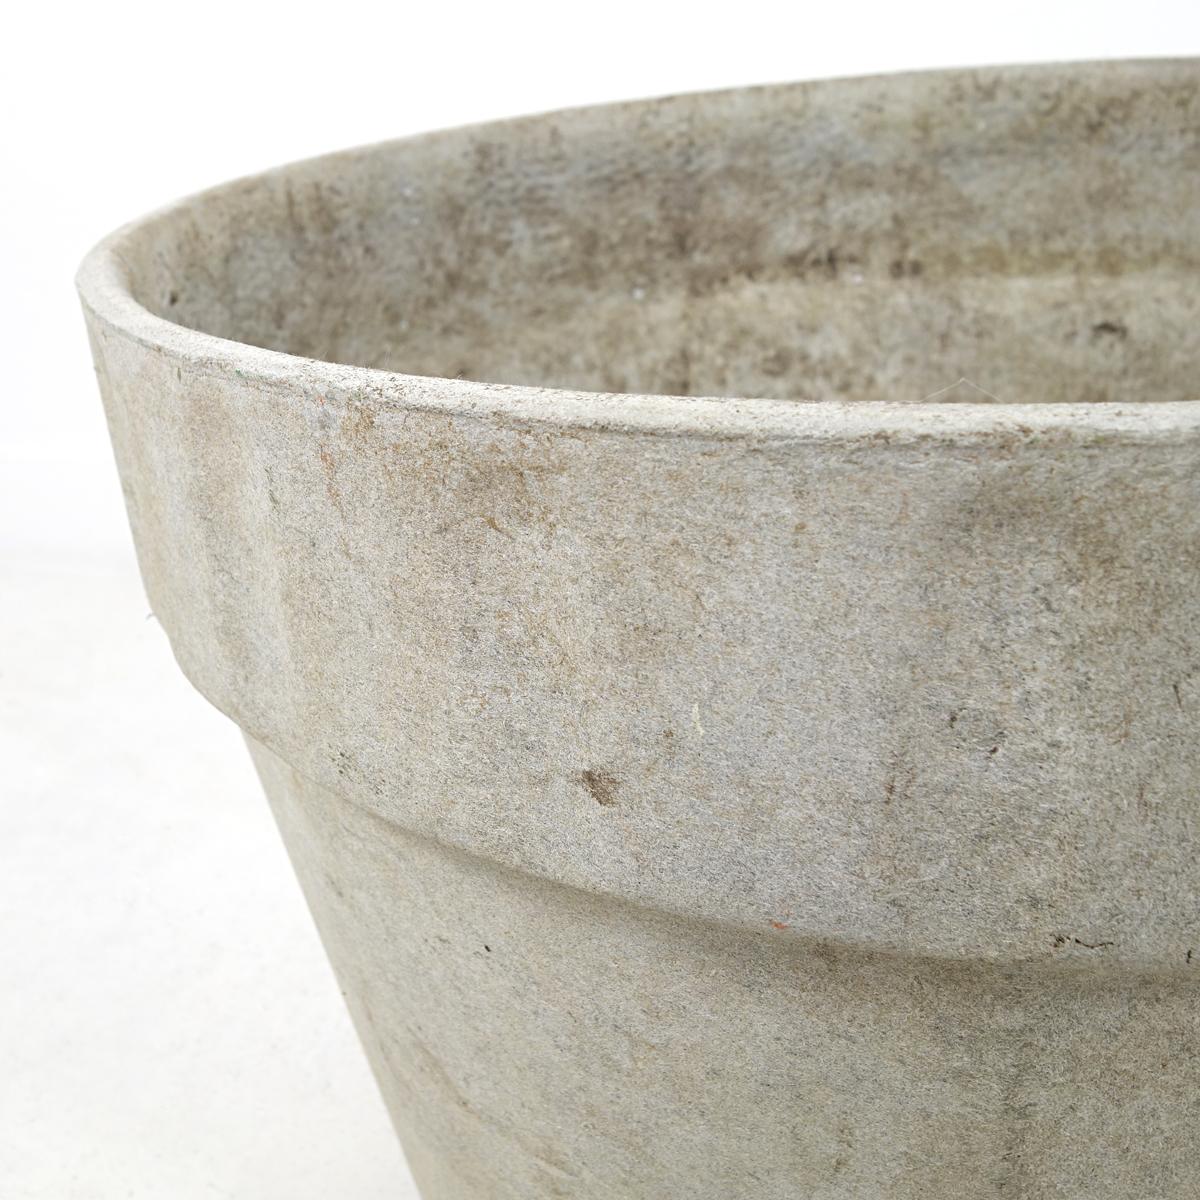 Concrete Pair of Planters in Flower Pot Shape with Ribbed Rims by Willy Guhl for Eternit